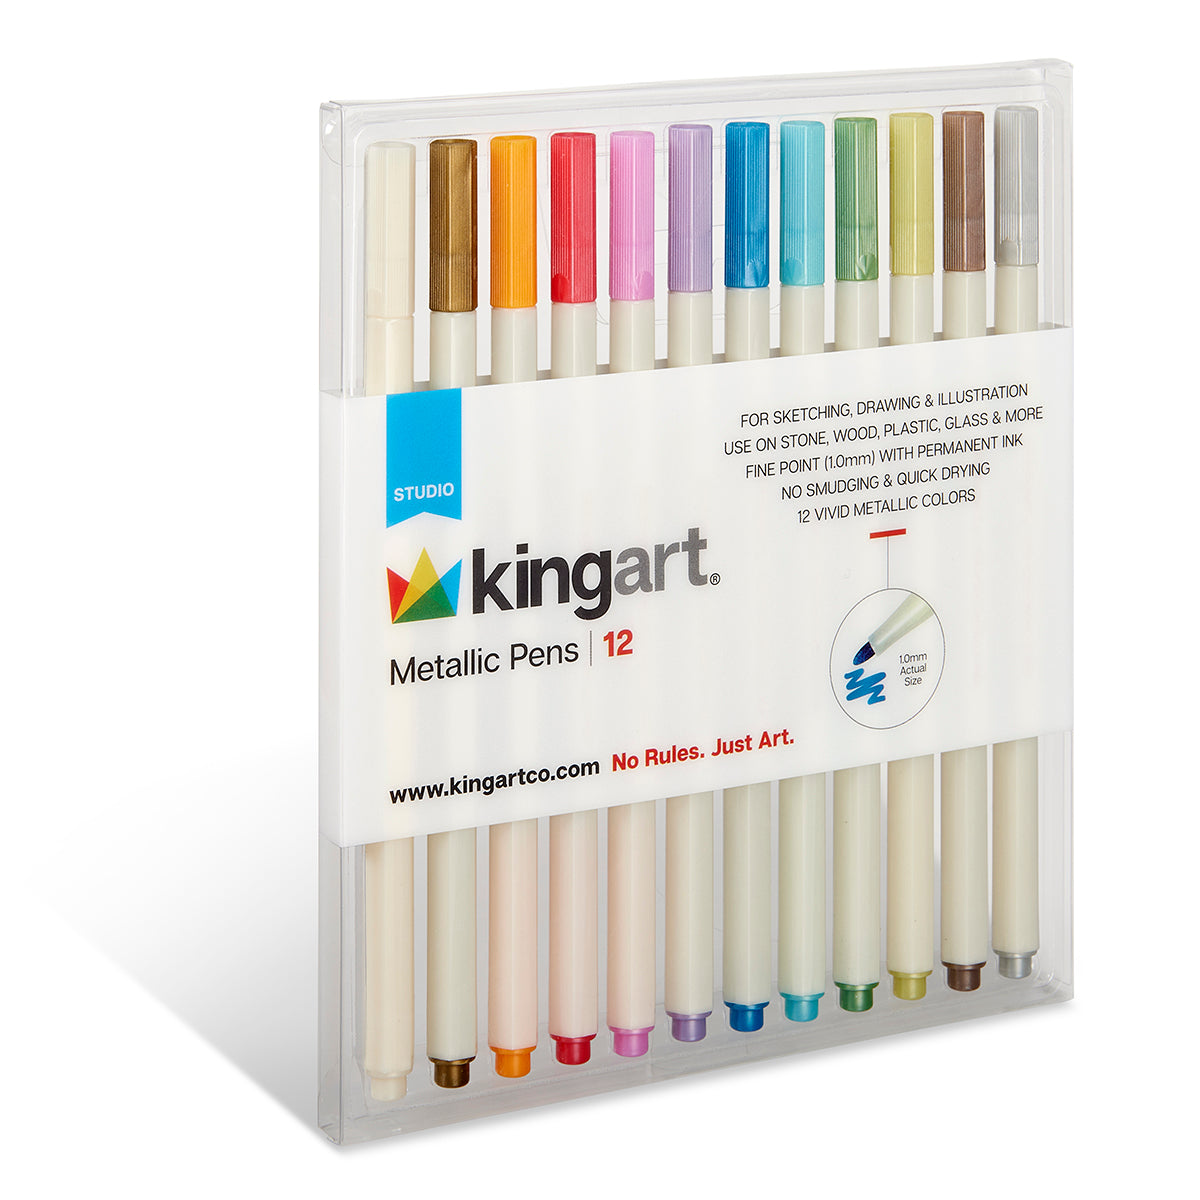 Kingart Metallic Pen Markers, Set of 12 Vivid Colors with Fine Point for DIY, Scrapbooks, Cards, Rocks & Works Great on Black Paper